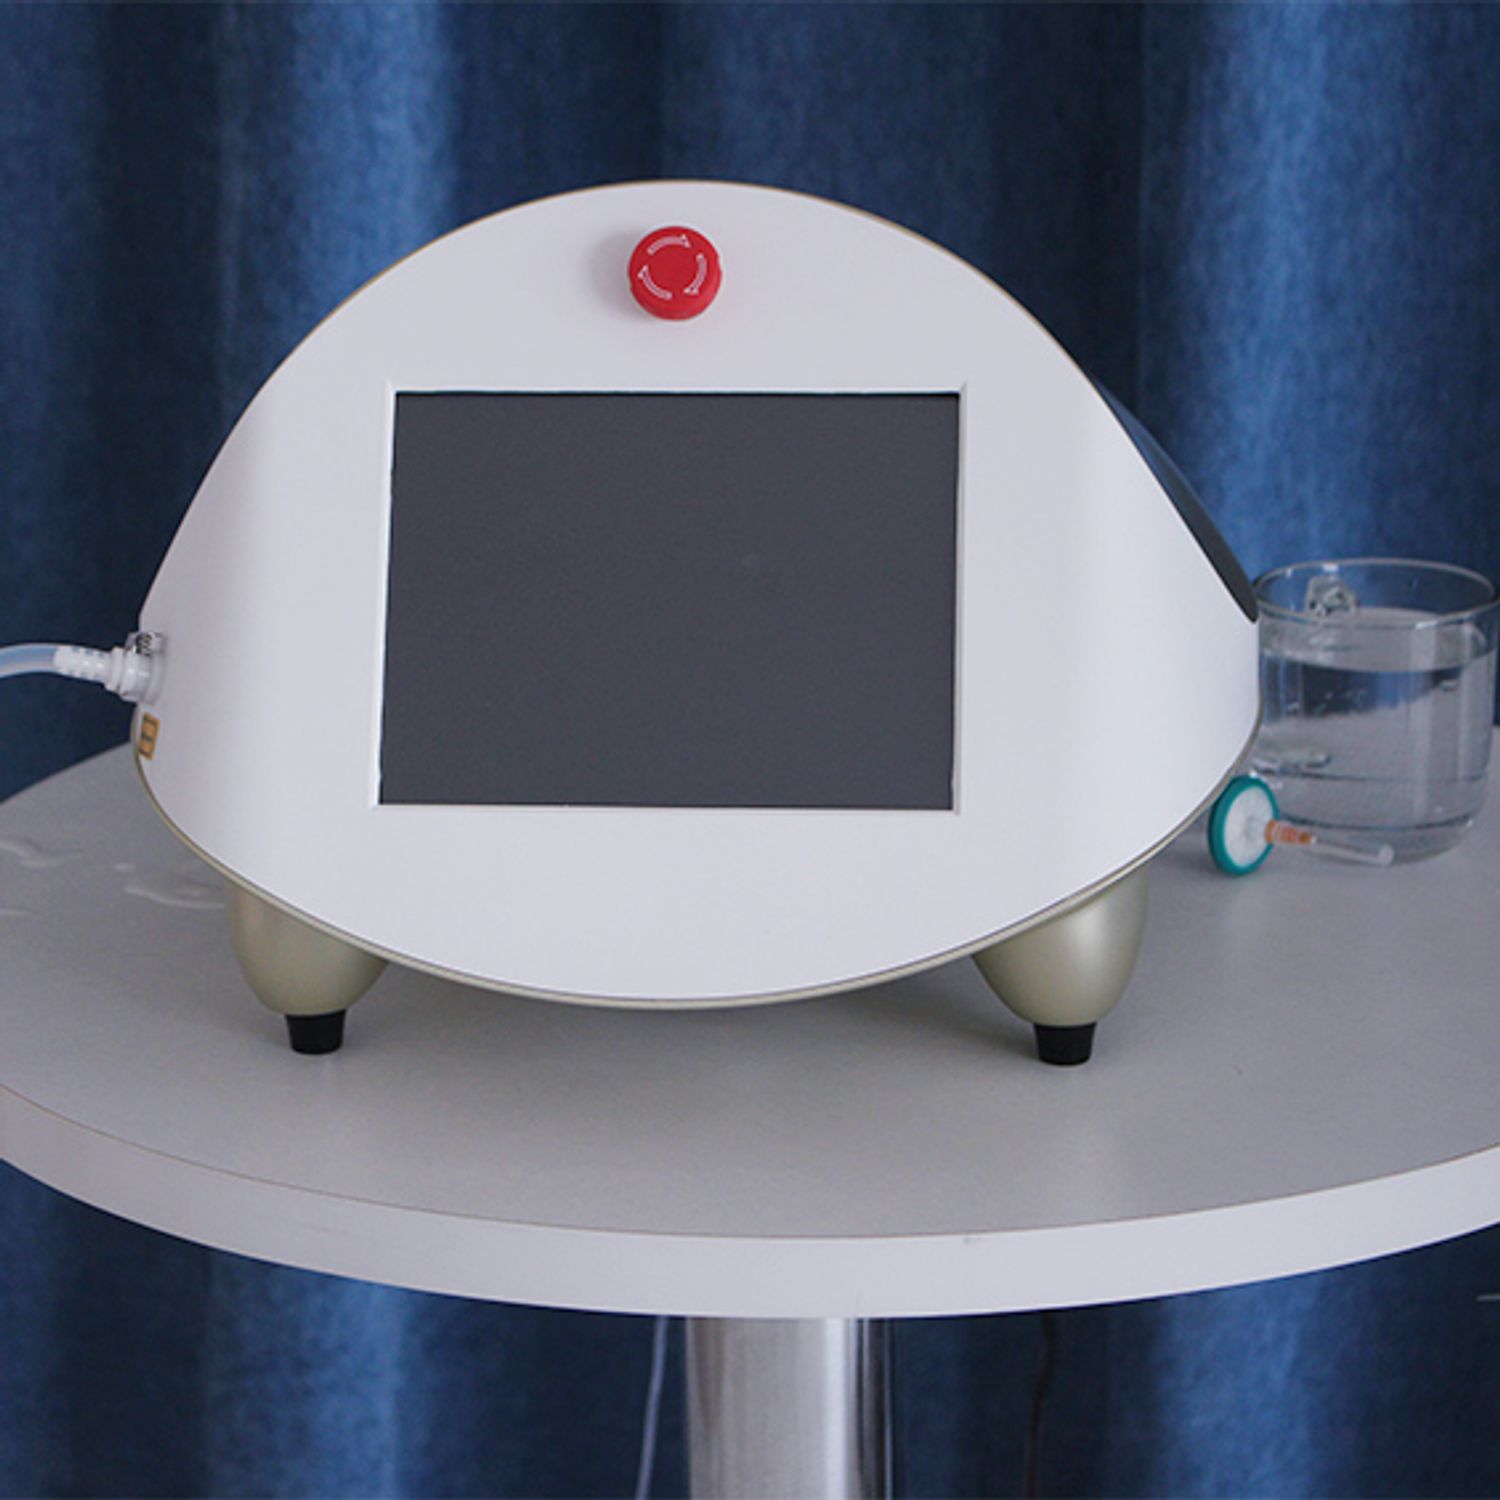 Jontelaser carbon therapy machine front view on the desk